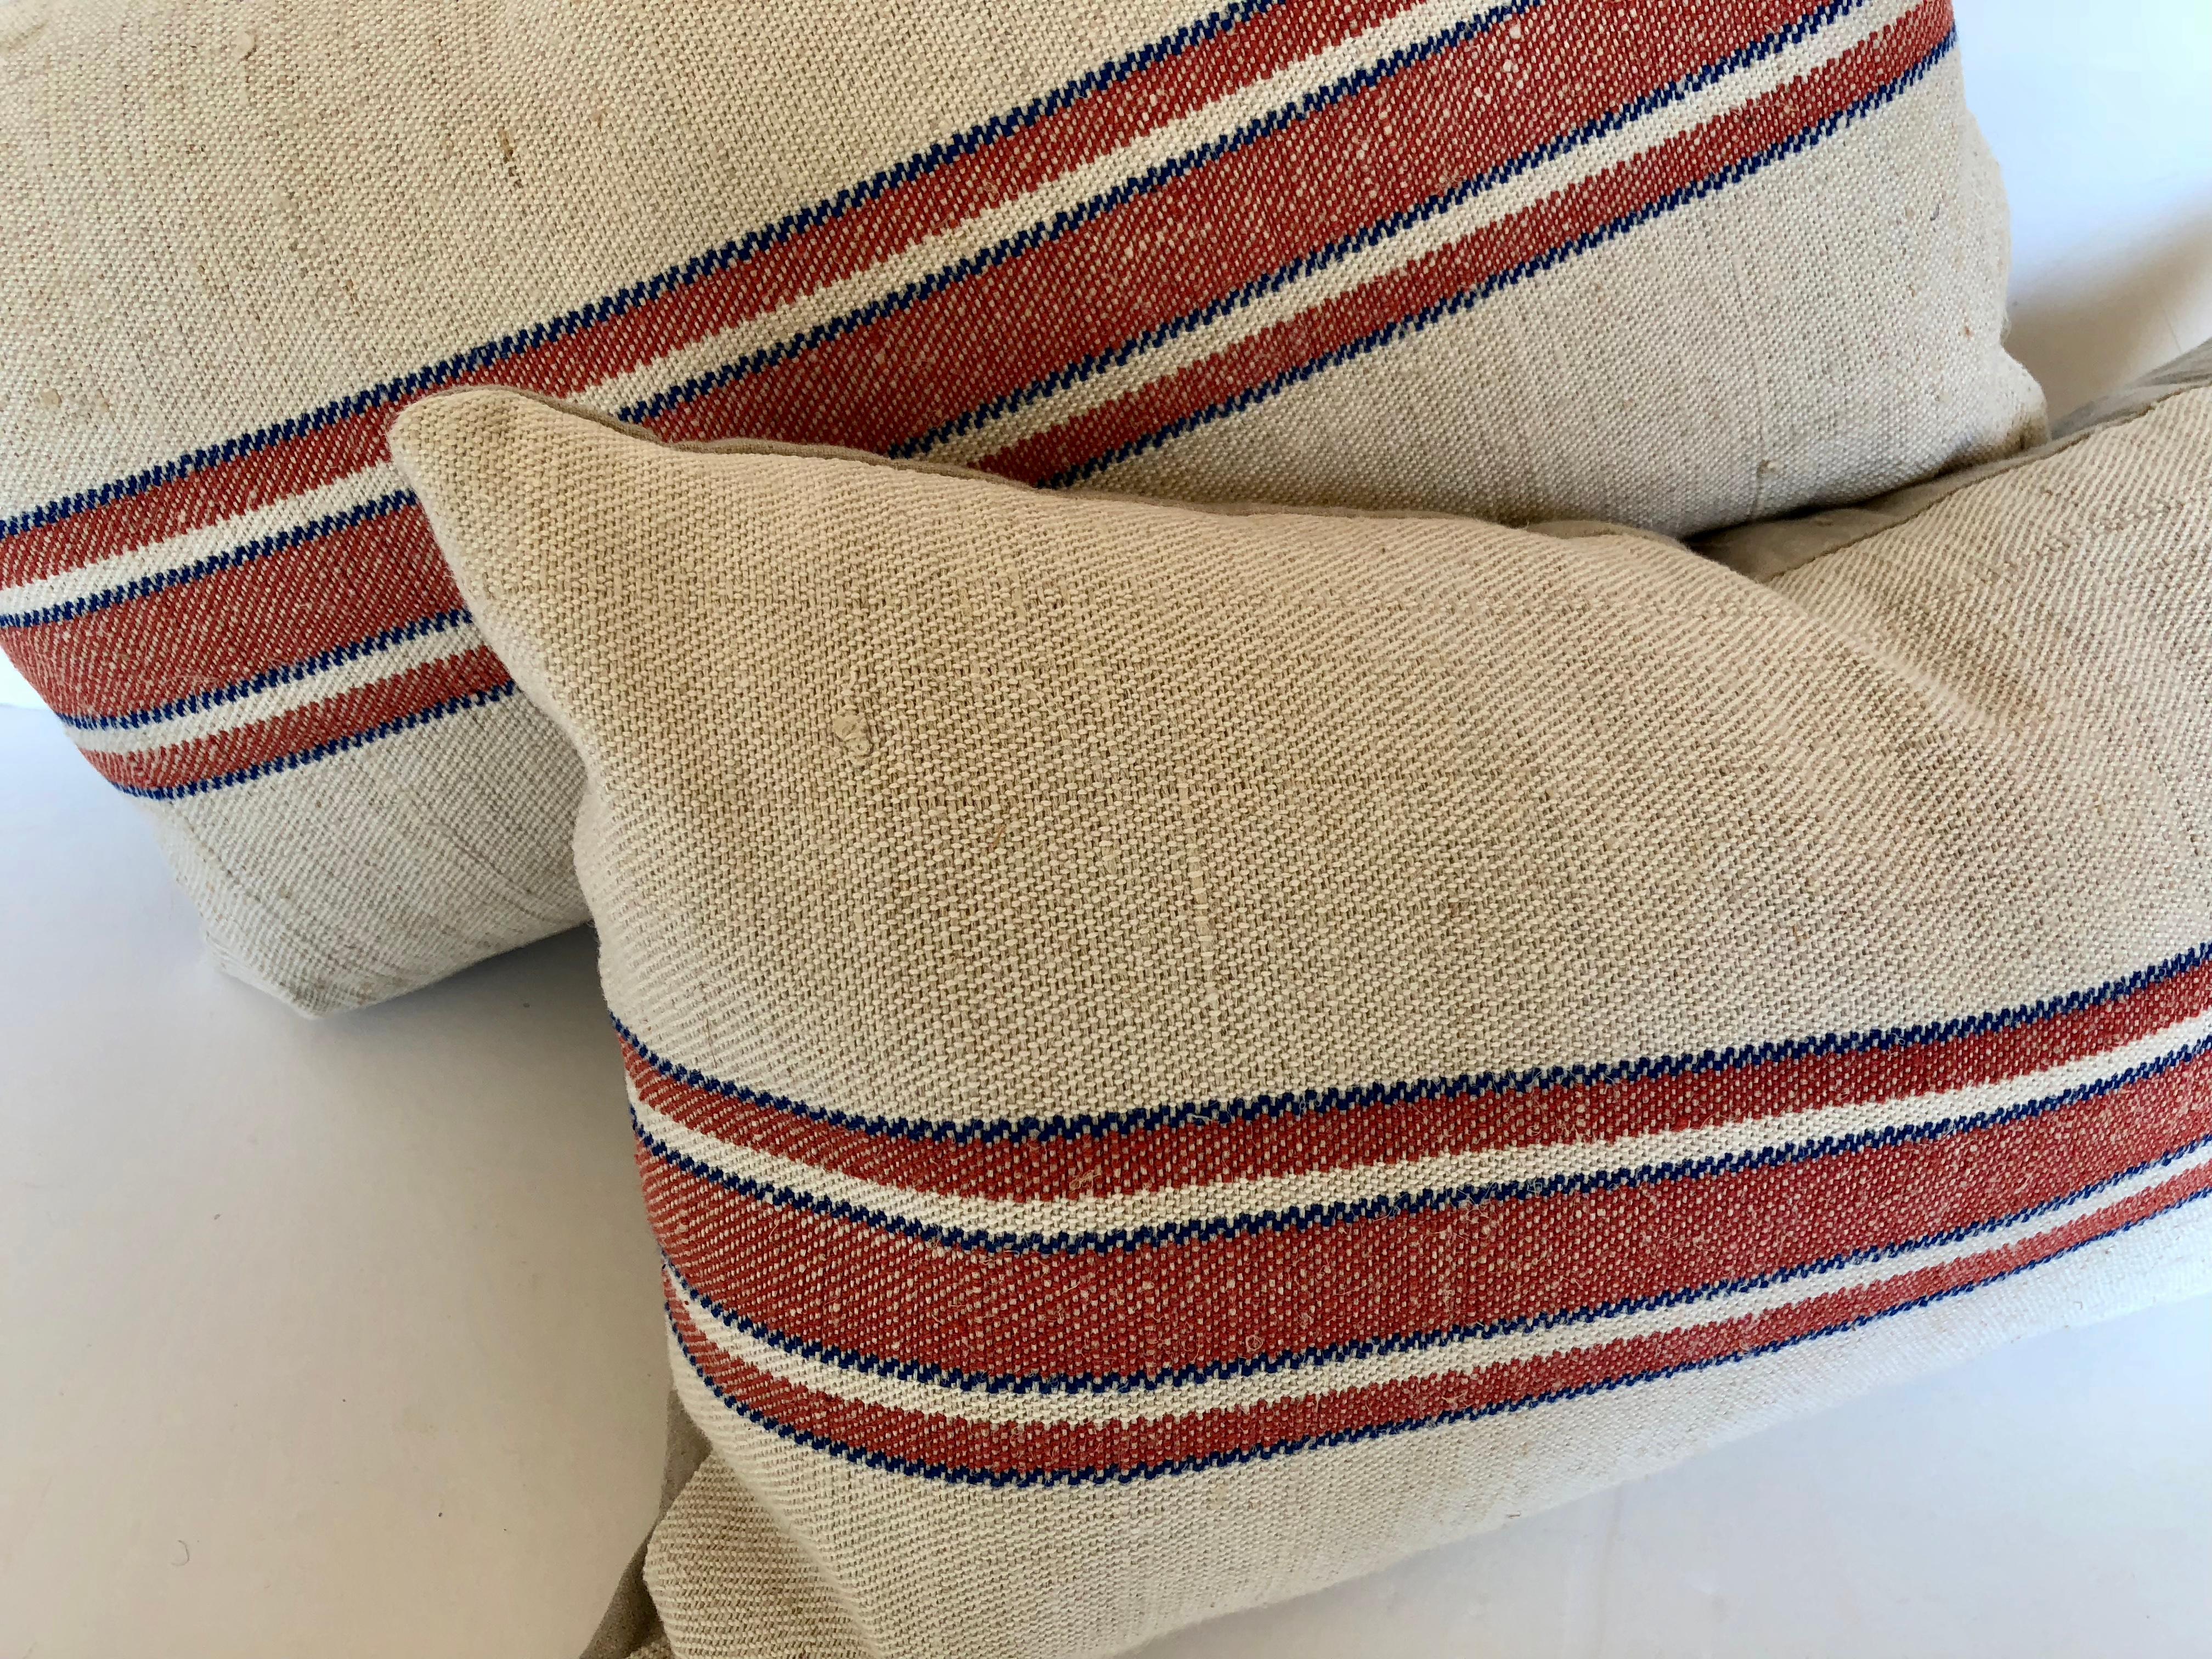 Custom pillows cut from a hand loomed hemp and linen German grain sack. Made by the farmer's wife to store grains in the barn. The bag has been laundered to remove any remnants of grain in the seams. The pillows are backed in a cream hand loomed